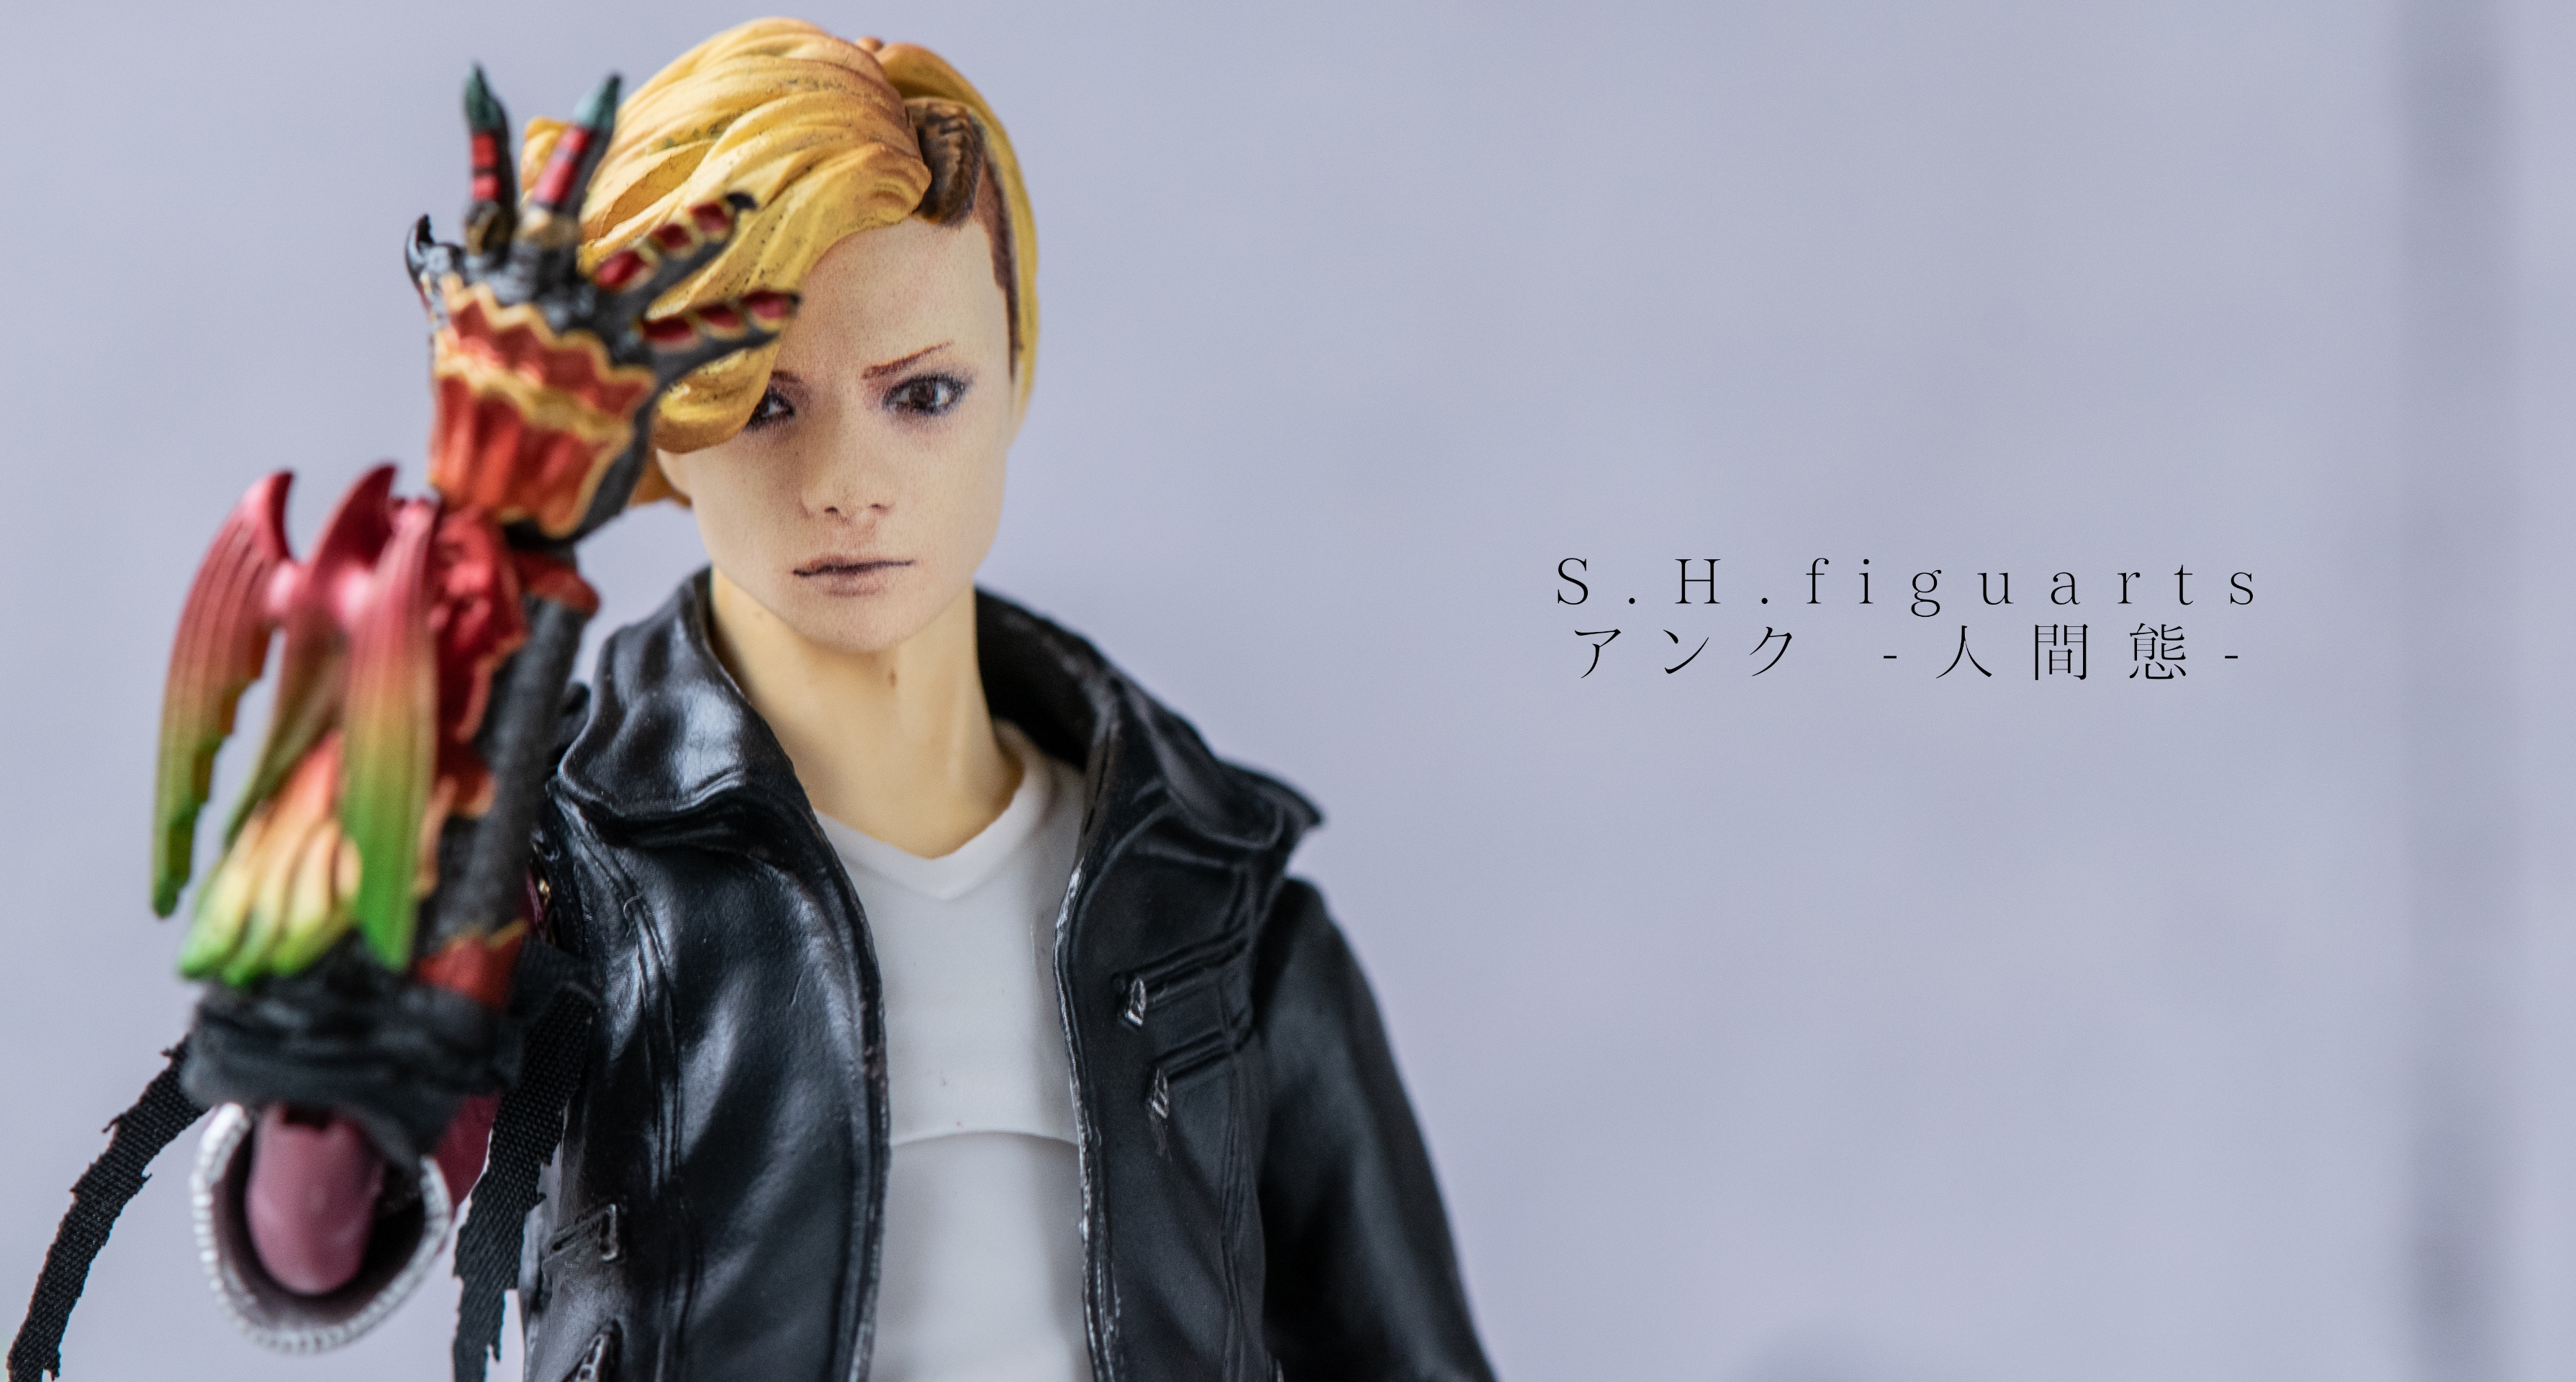 S.H.FiGuarts アンク 人間態 送料無料